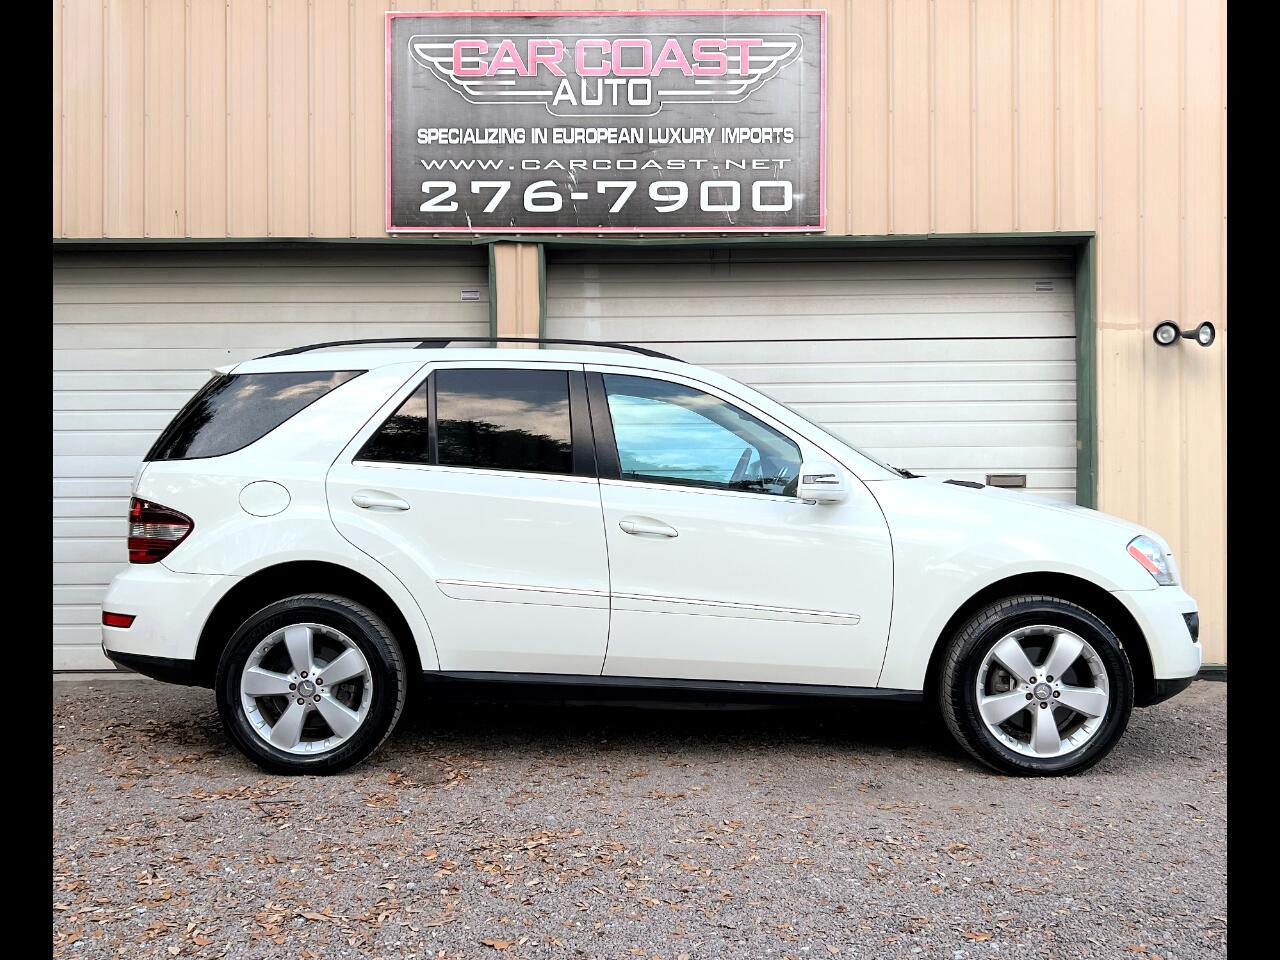 Used 2011 Mercedes-Benz M-Class ML350 4MATIC for Sale in Charleston SC  29407 Car Coast Auto